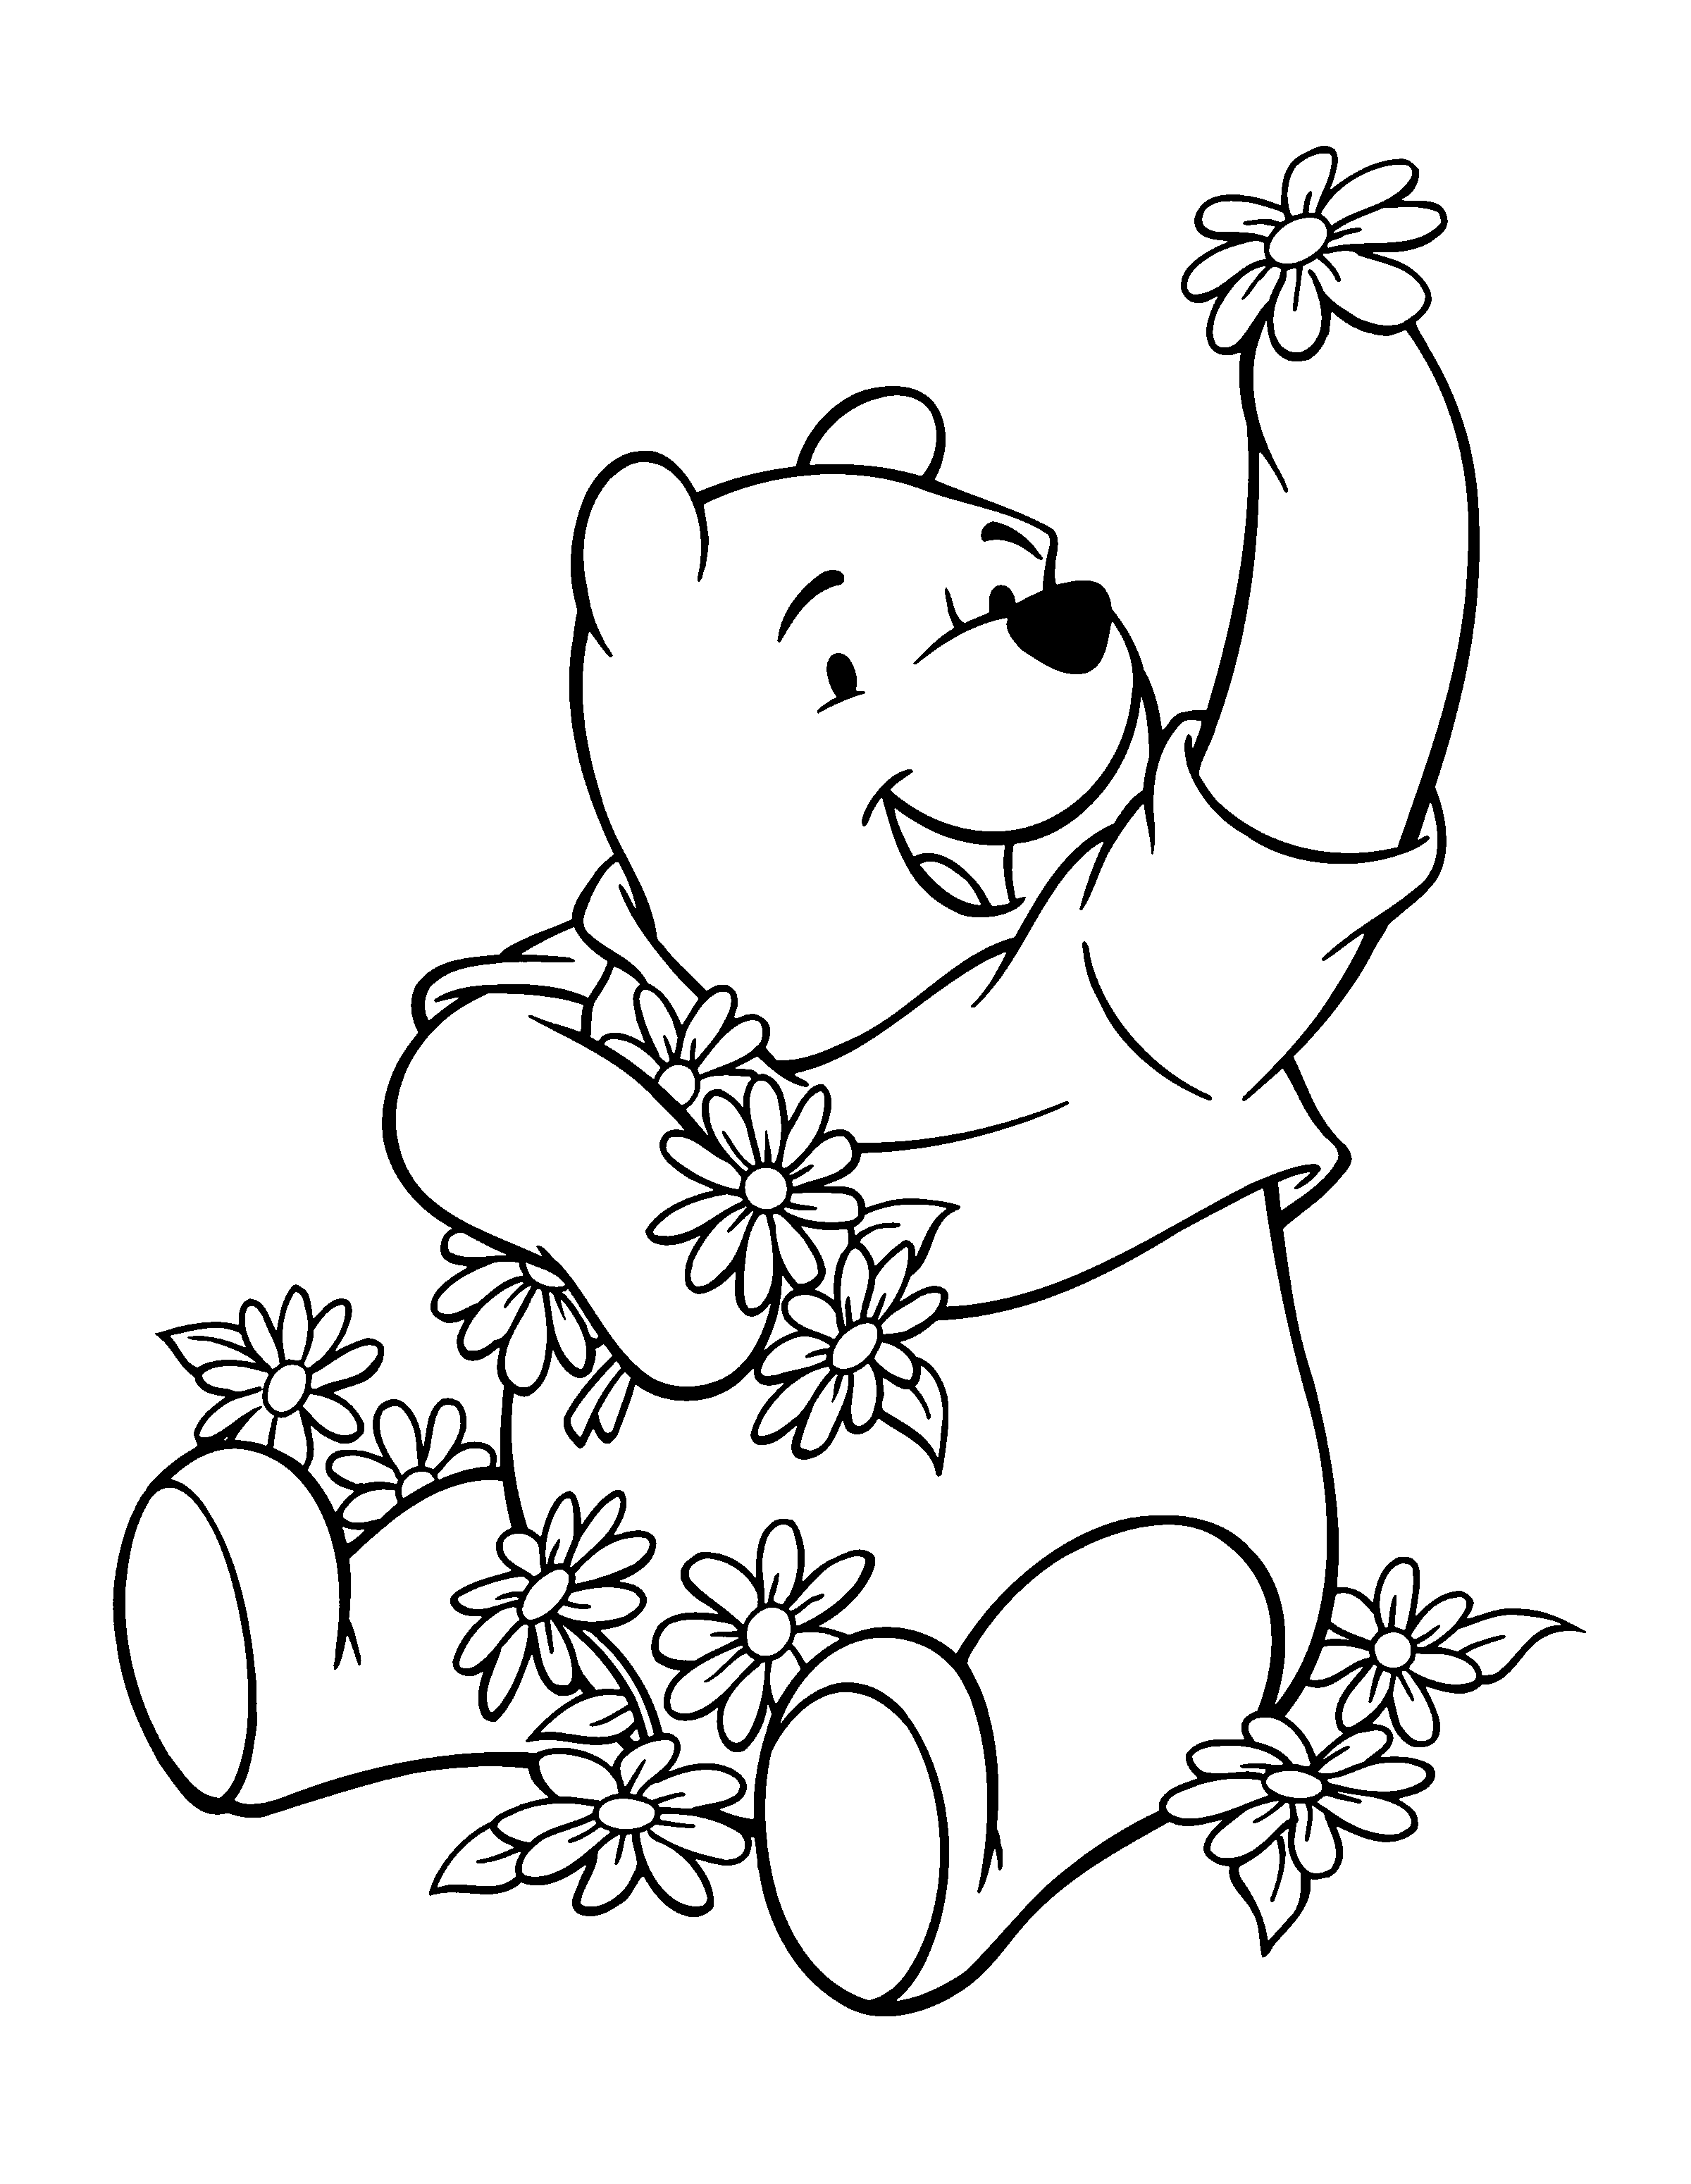 Cartoon character coloring pages to download and print for ...